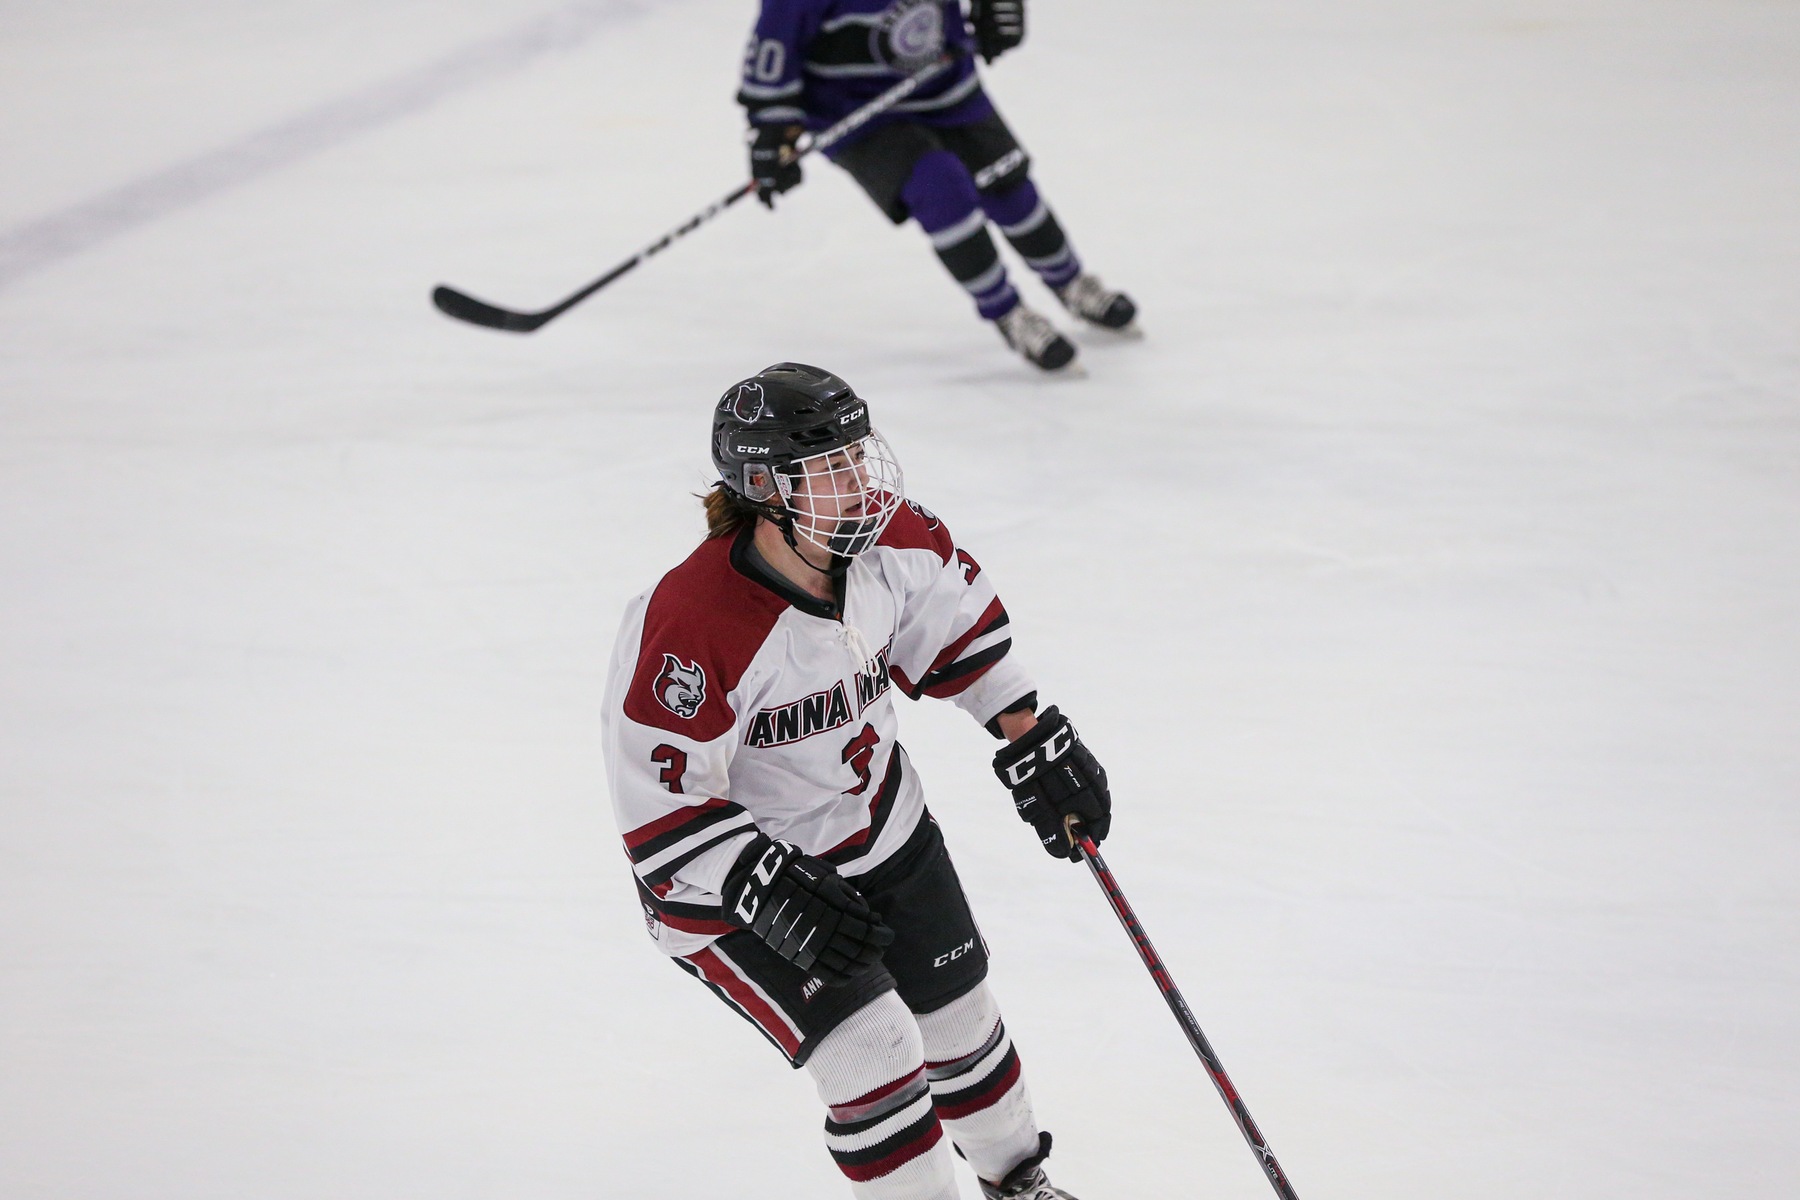 Women's Hockey Drops Game Against Post, 8-1